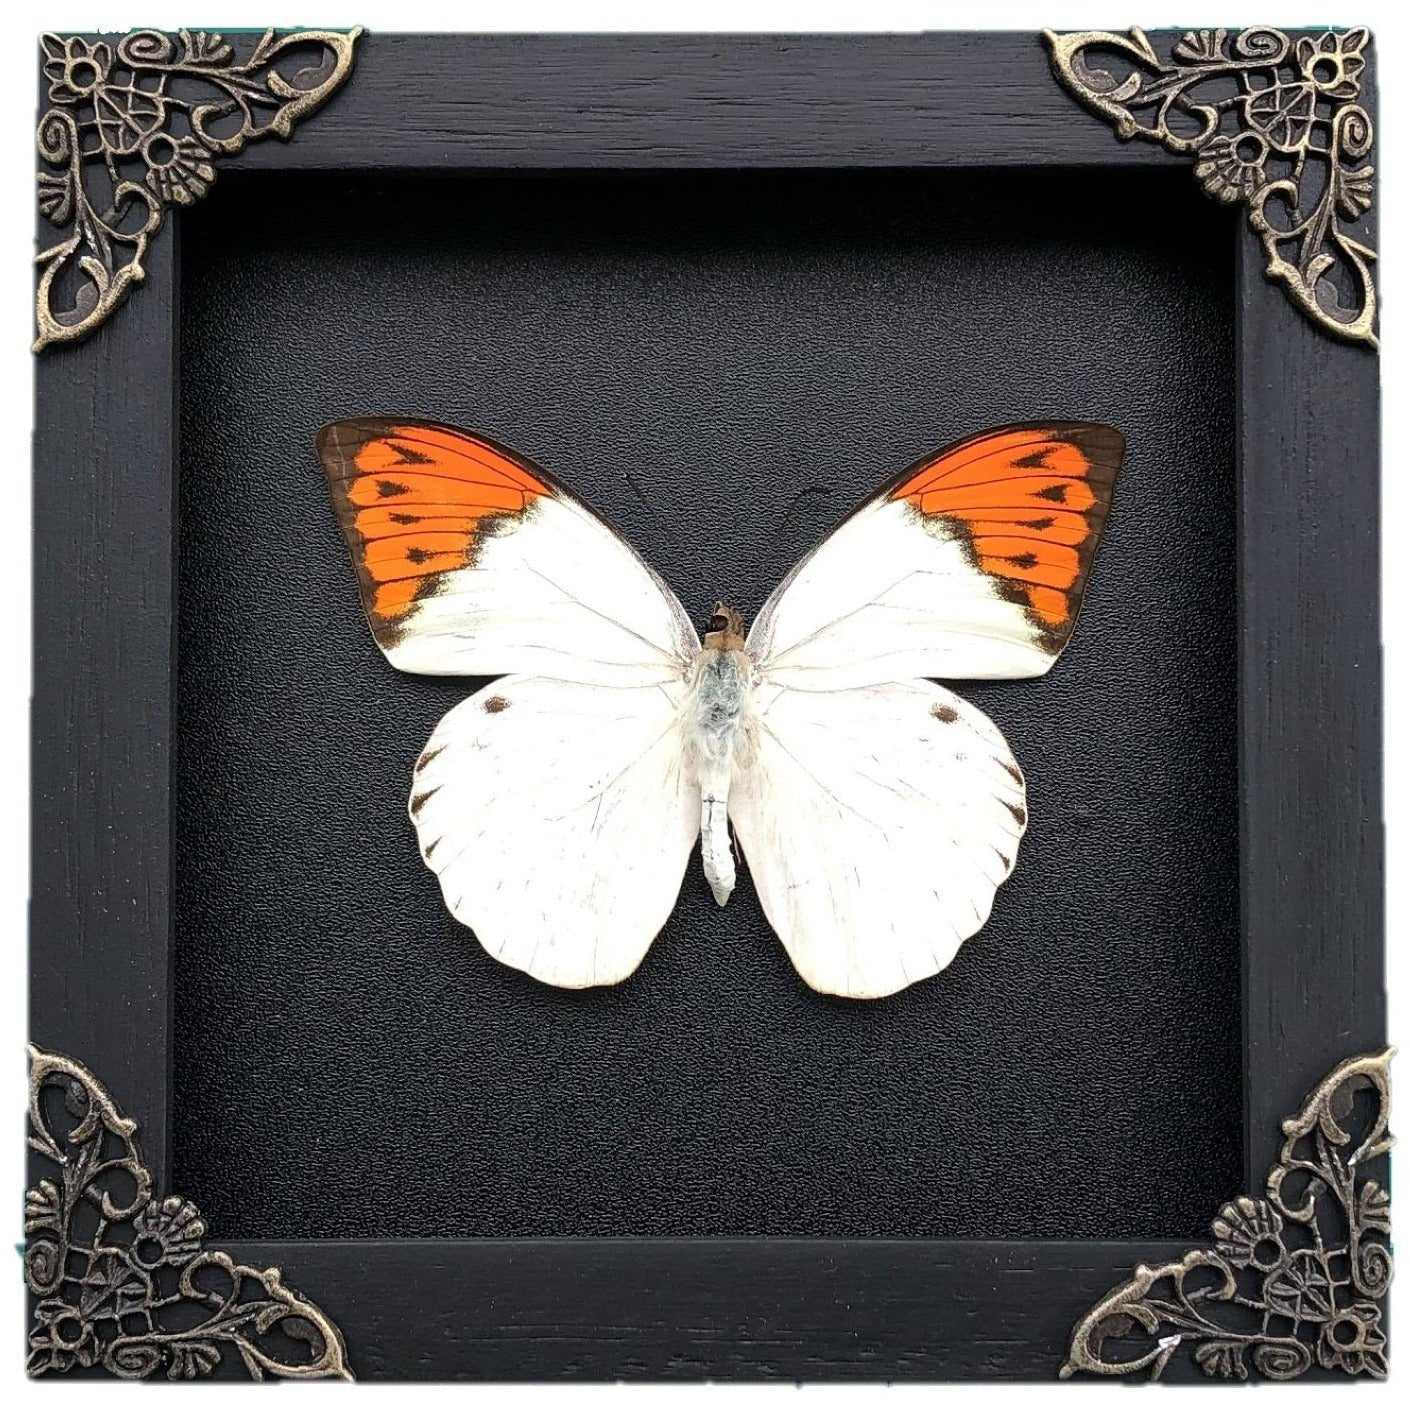 Real Framed Butterfly Black Wooden Shadow Box Dried Pieridae Insect Lover Taxidermy Dead Bug Taxadermy Specimen Display Wall Art Hanging Decoration - Vinacreations